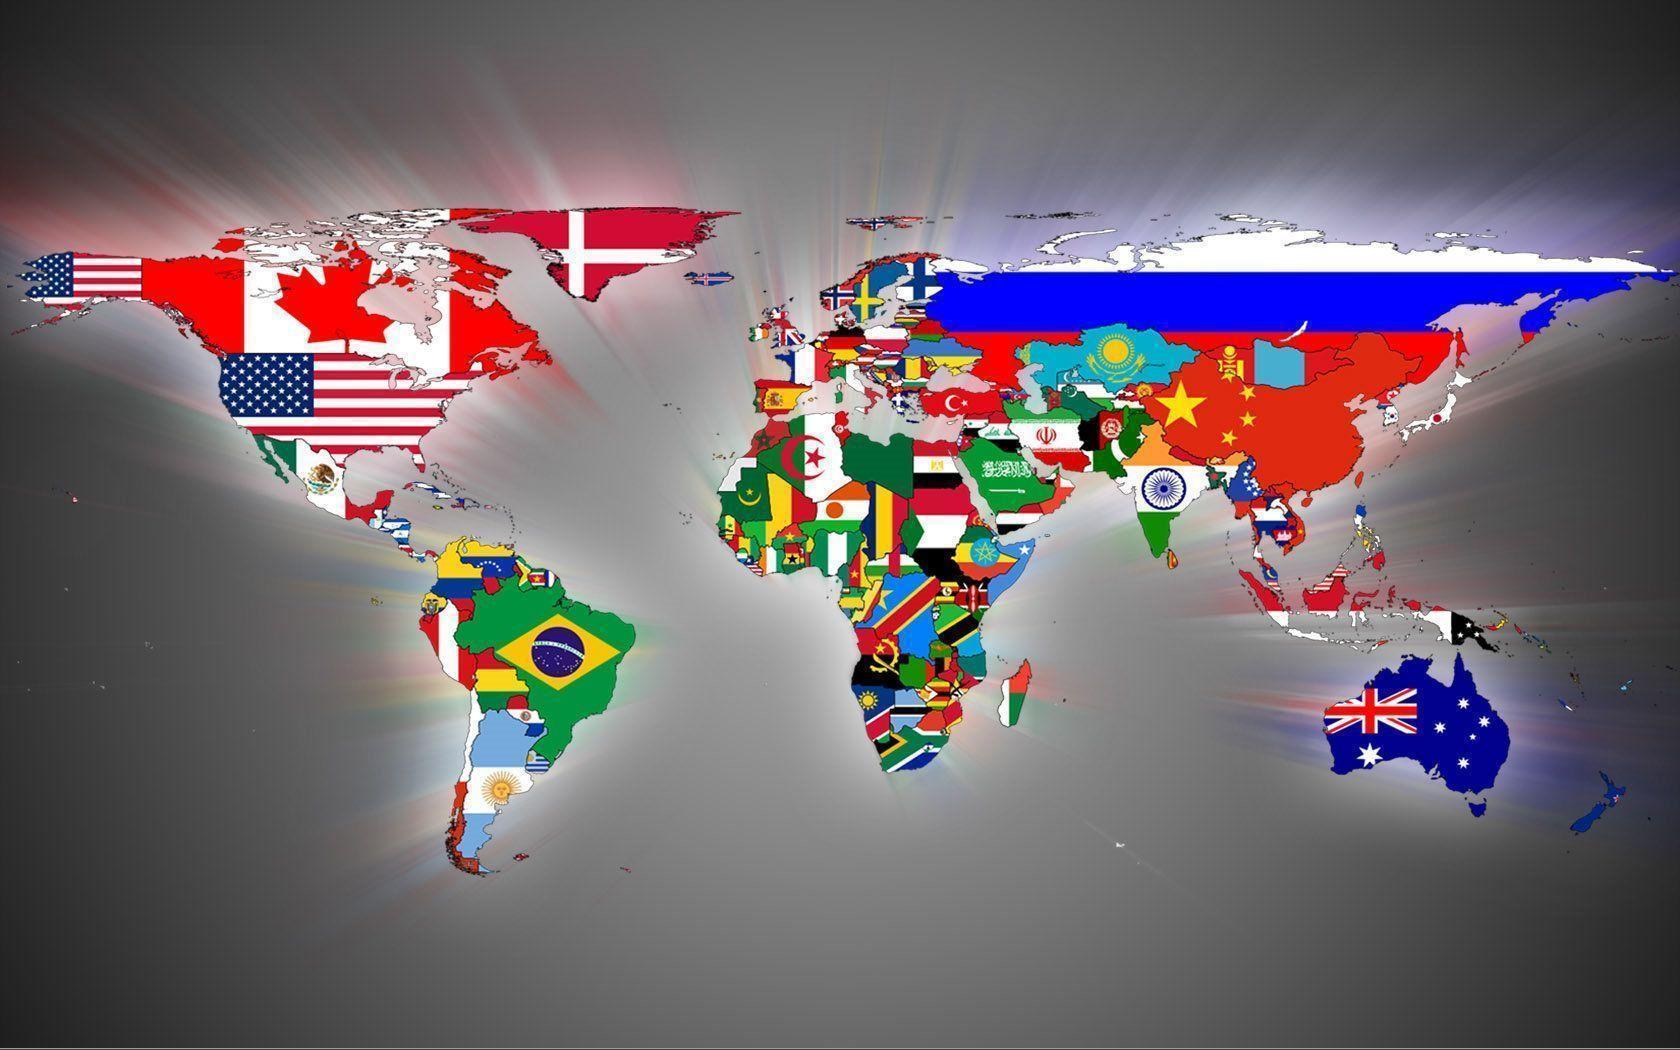 World Map Background for Powerpoint Presentations, World Map PPT